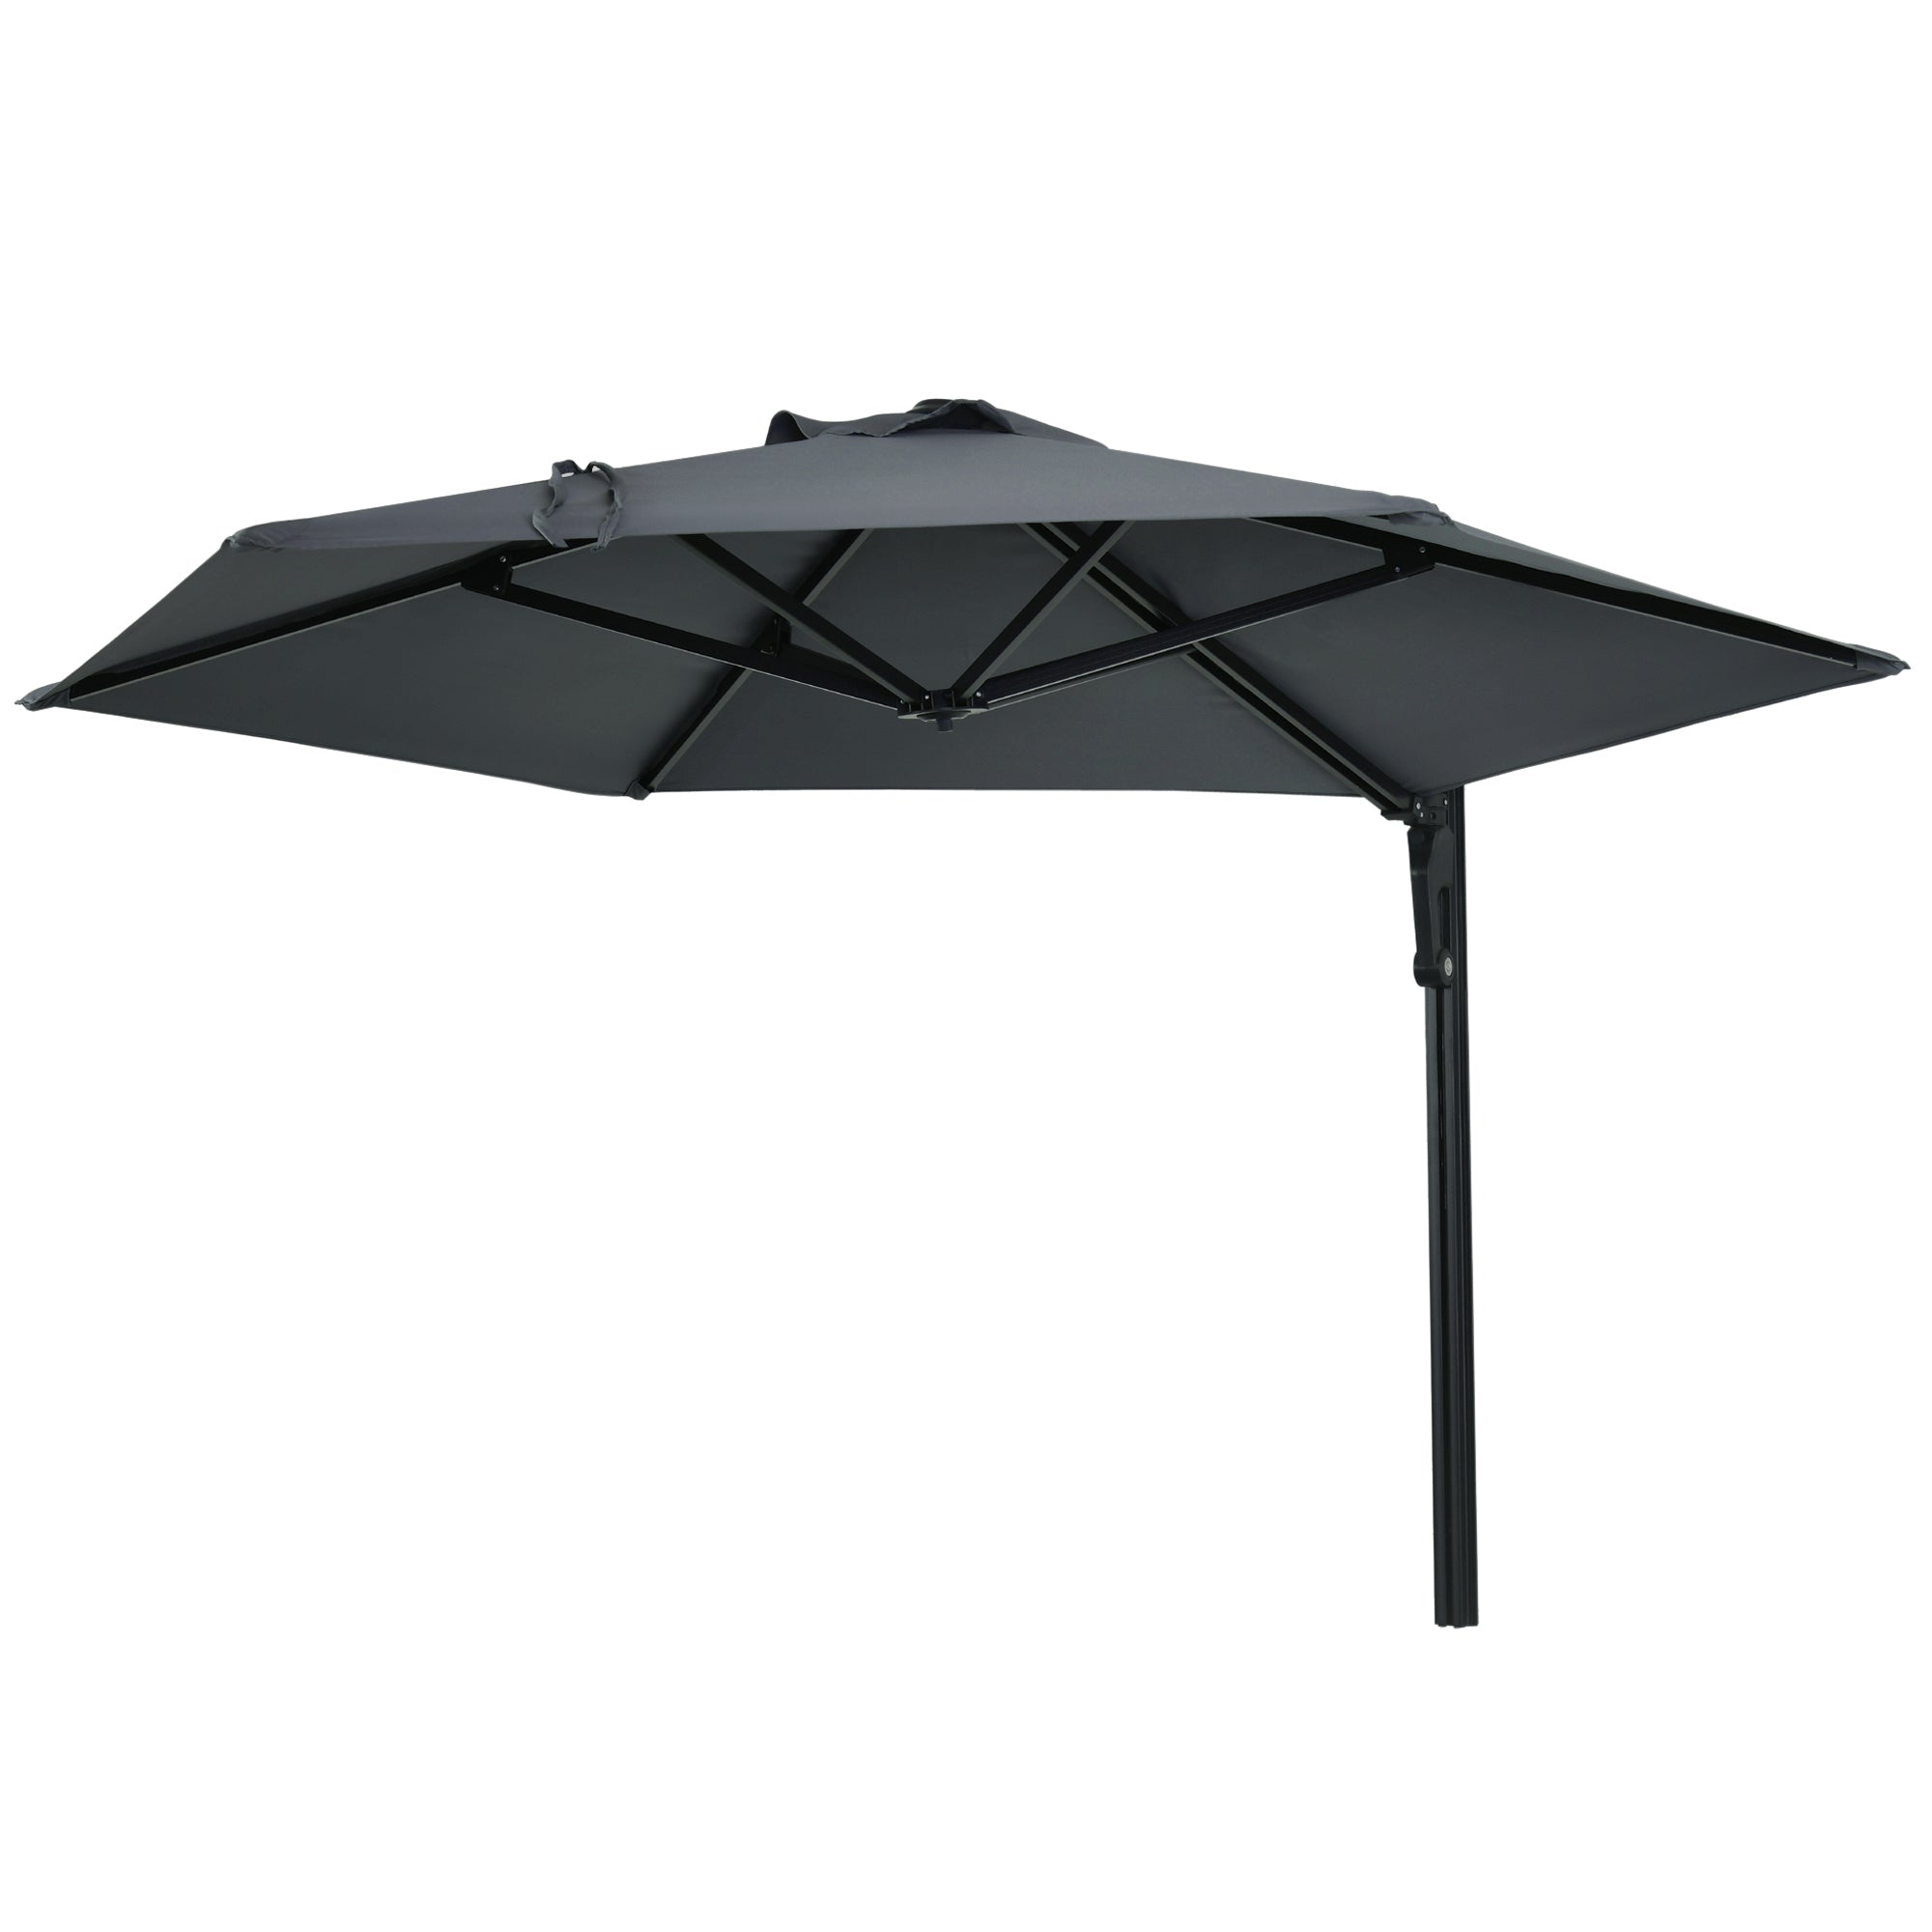 Wall Mounted Parasol, Hand to Push Outdoor Patio Umbrella with 180 Degree Rotatable Canopy for Porch, Deck, Garden, 250 cm, Dark Grey-0